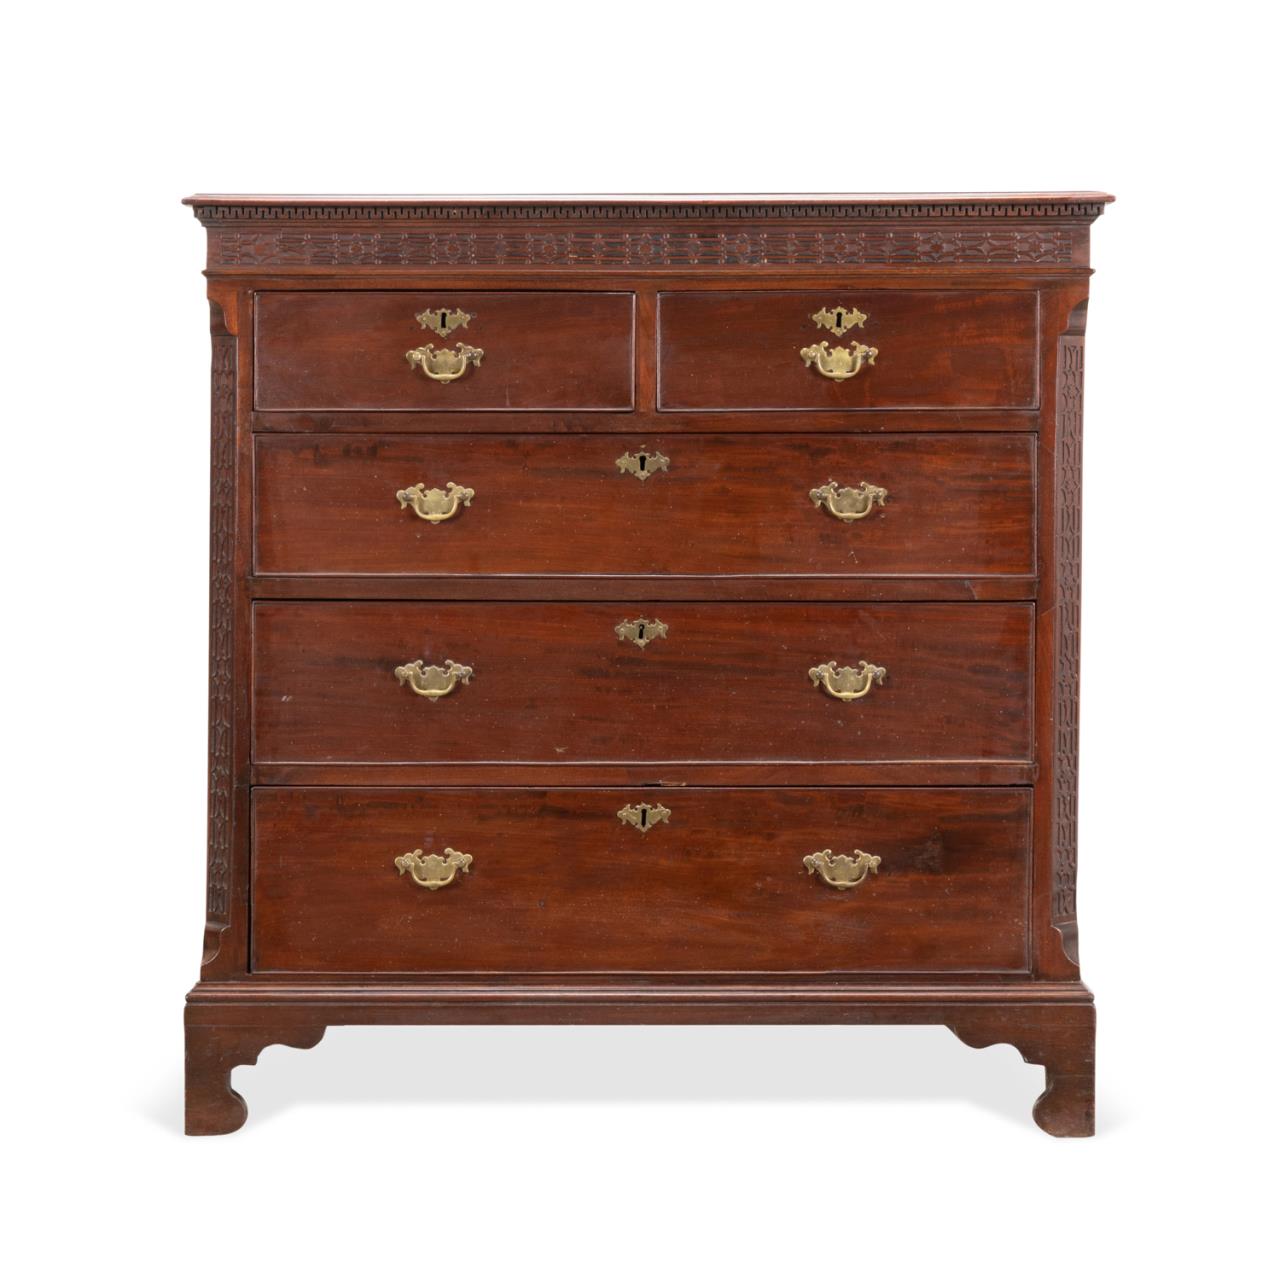 CHIPPENDALE STYLE FIVE DRAWER WOOD